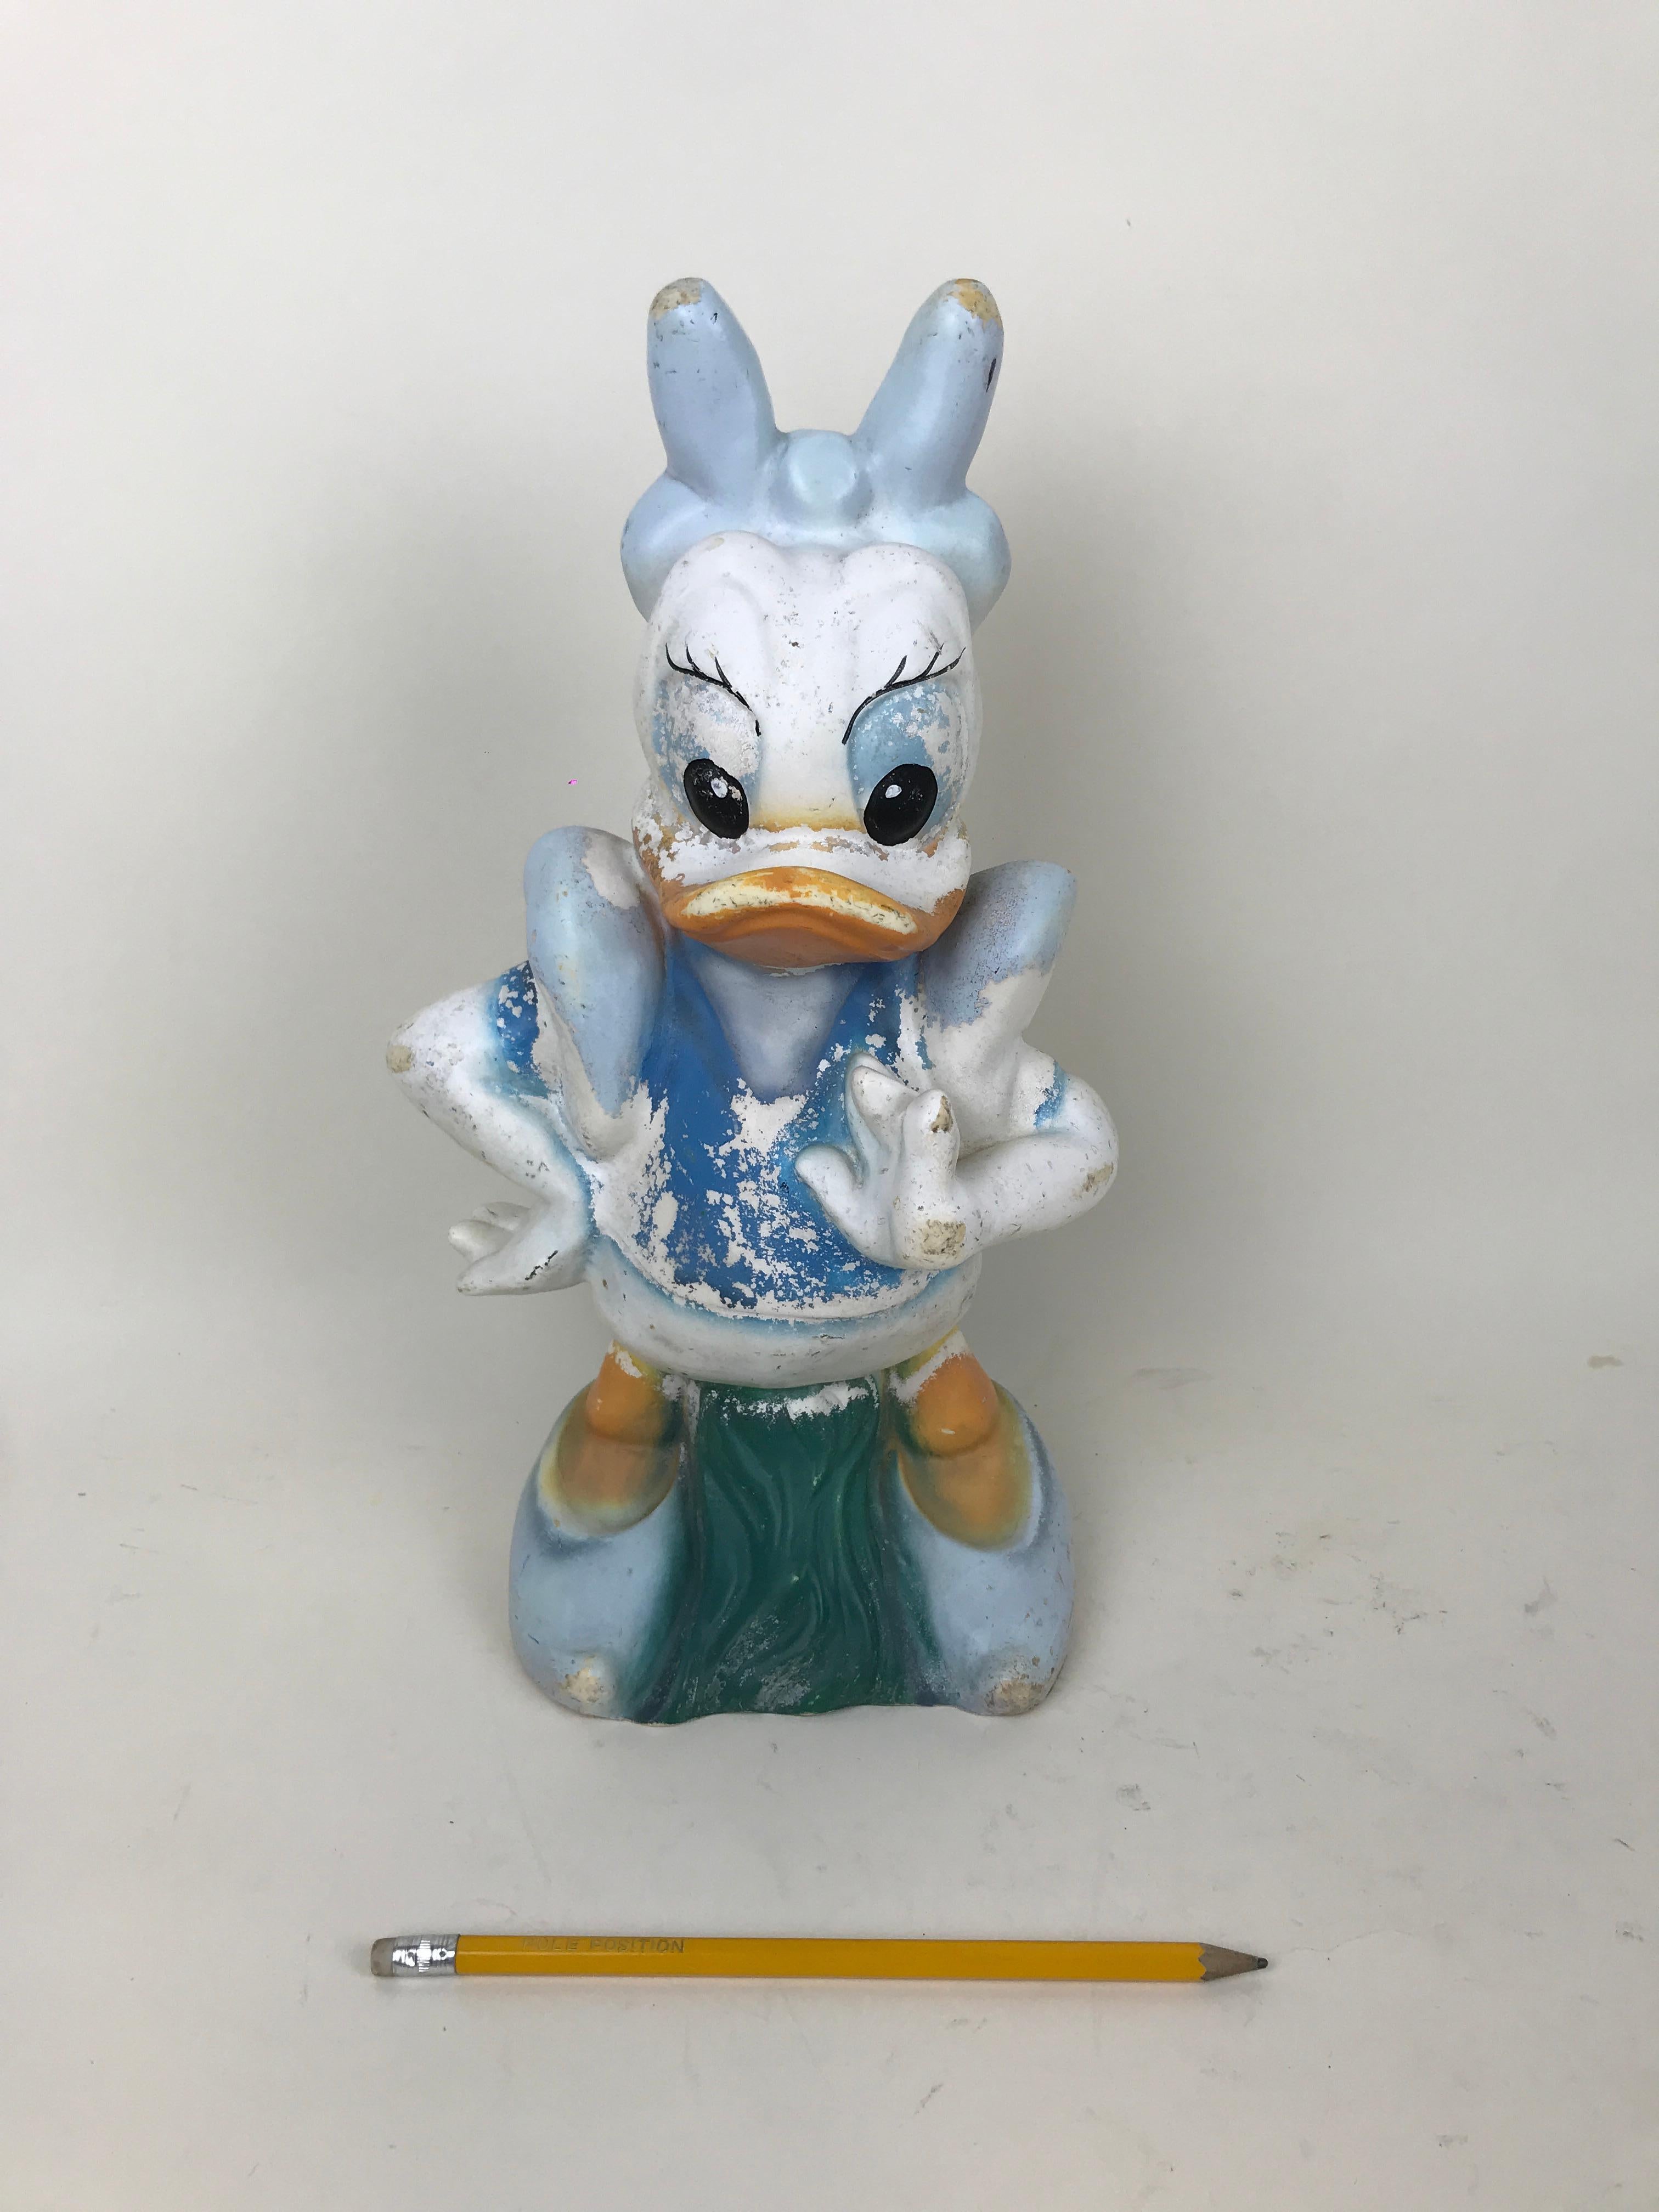 Vintage plastic garden sculpture of Daisy Duck. Made for Disney by Austrian maker Celloplast in the 1990s.

Marked Disney on the bottom right side of the sculpture and CELLOPLAST Made in Austria on bottom.